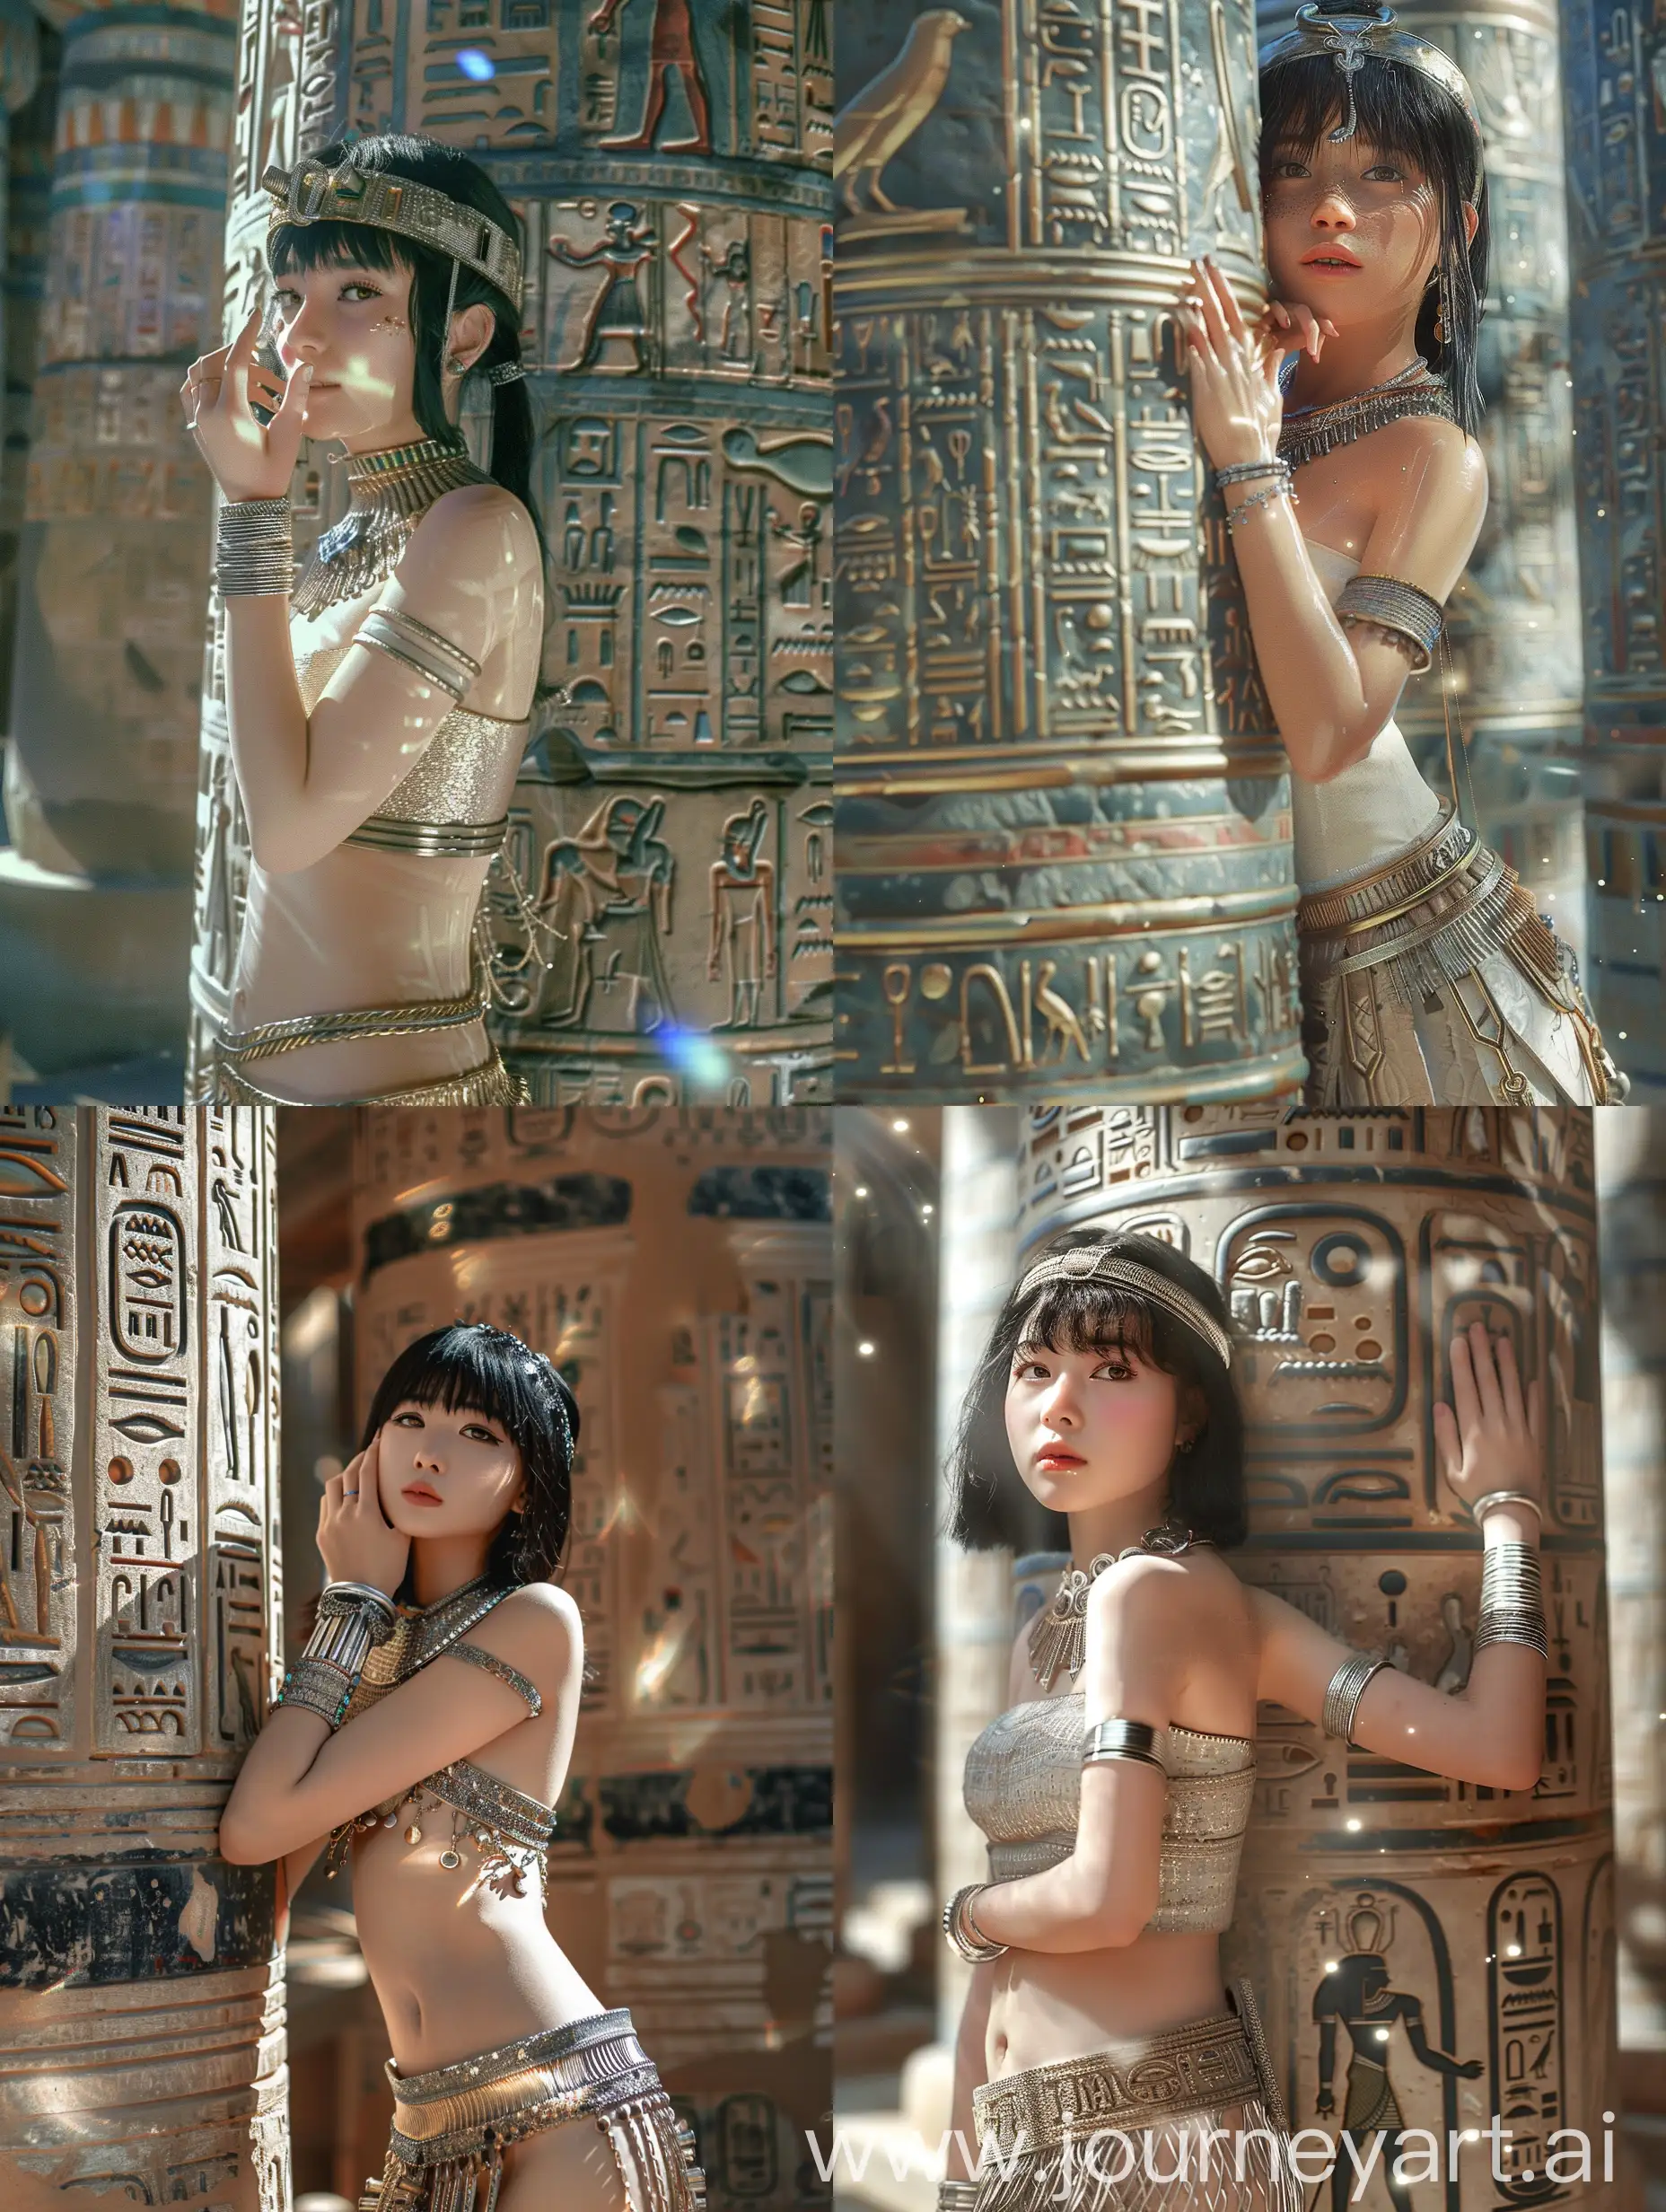 inside egyptian palace, large column with many details carved in ancient egyptian style, an asian girl, 21 years old, hand on the column, girl with black hair small details, cheeks rosy and very beautiful. Cool, her hand raised to her chin gracefully, wearing a metal headband, silver bracelets, meticulously detailed gold necklace, earrings, metal woven into a soft short skirt, she has a stunning figure, a light Bright art studio style, focus on the subject, shimmering metal refracting light